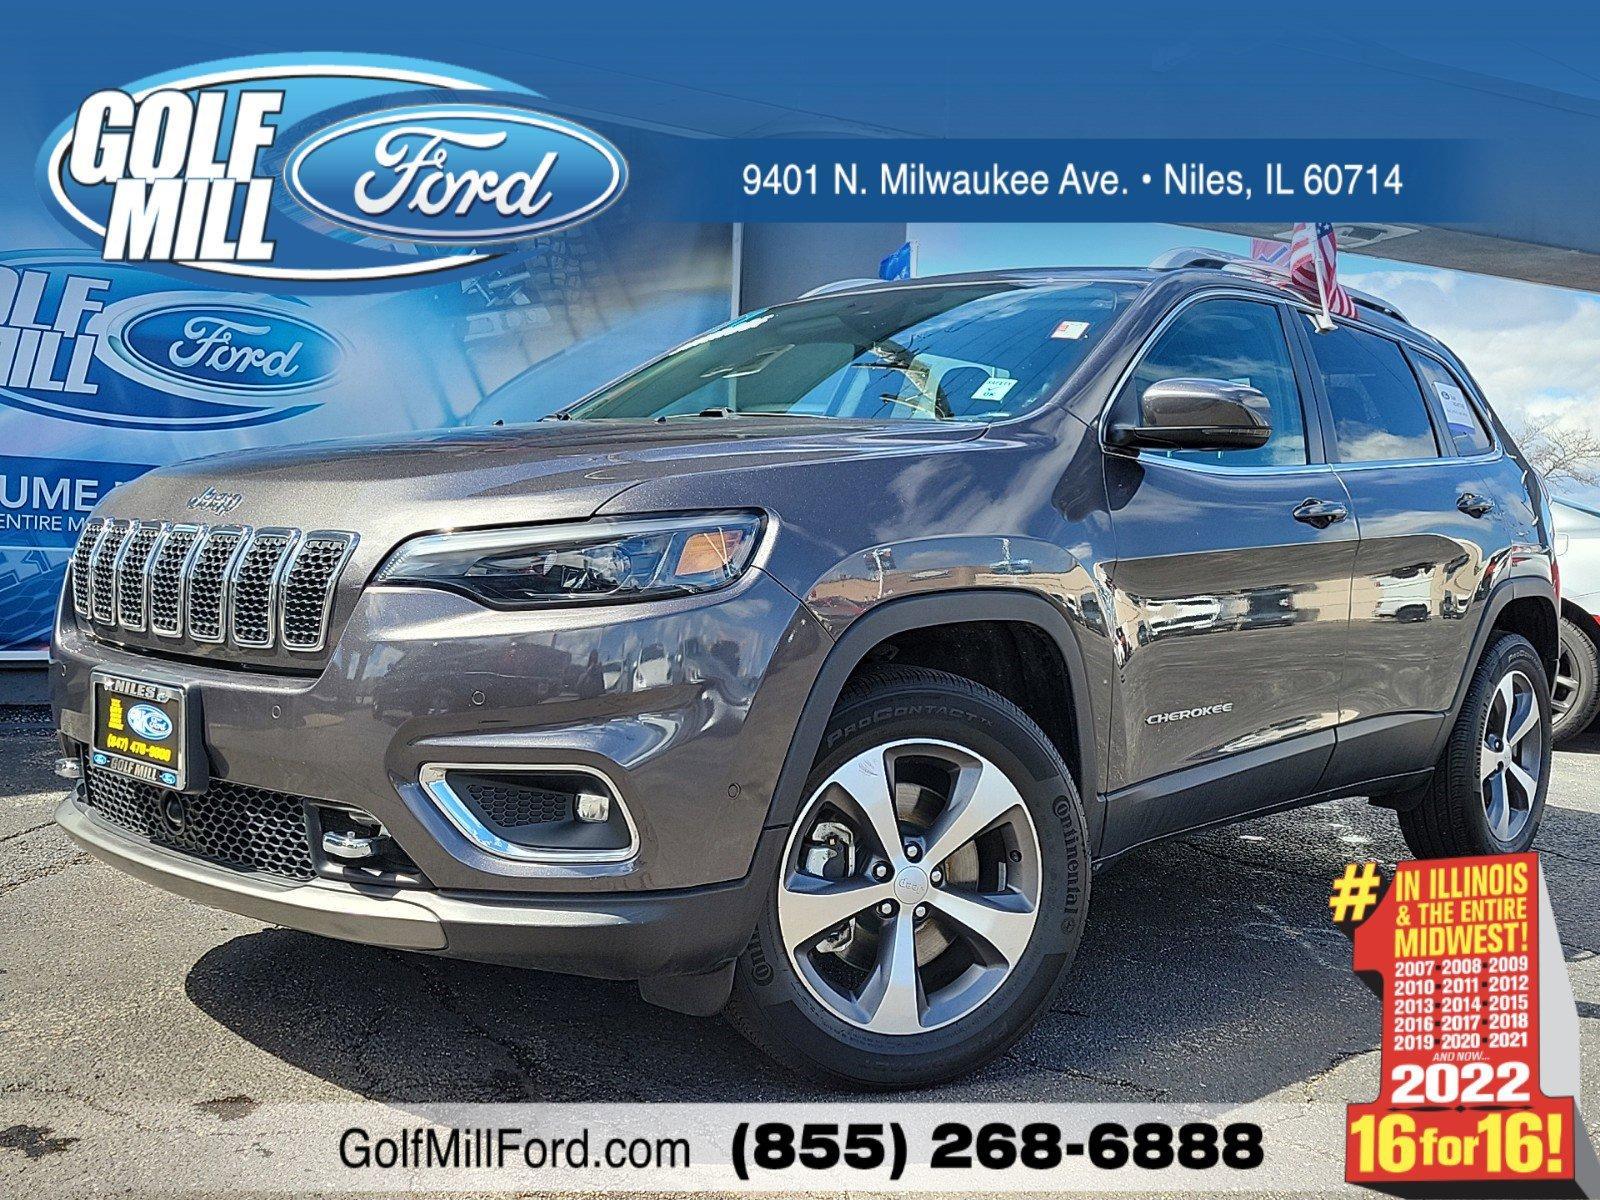 2021 Jeep Cherokee Vehicle Photo in Plainfield, IL 60586